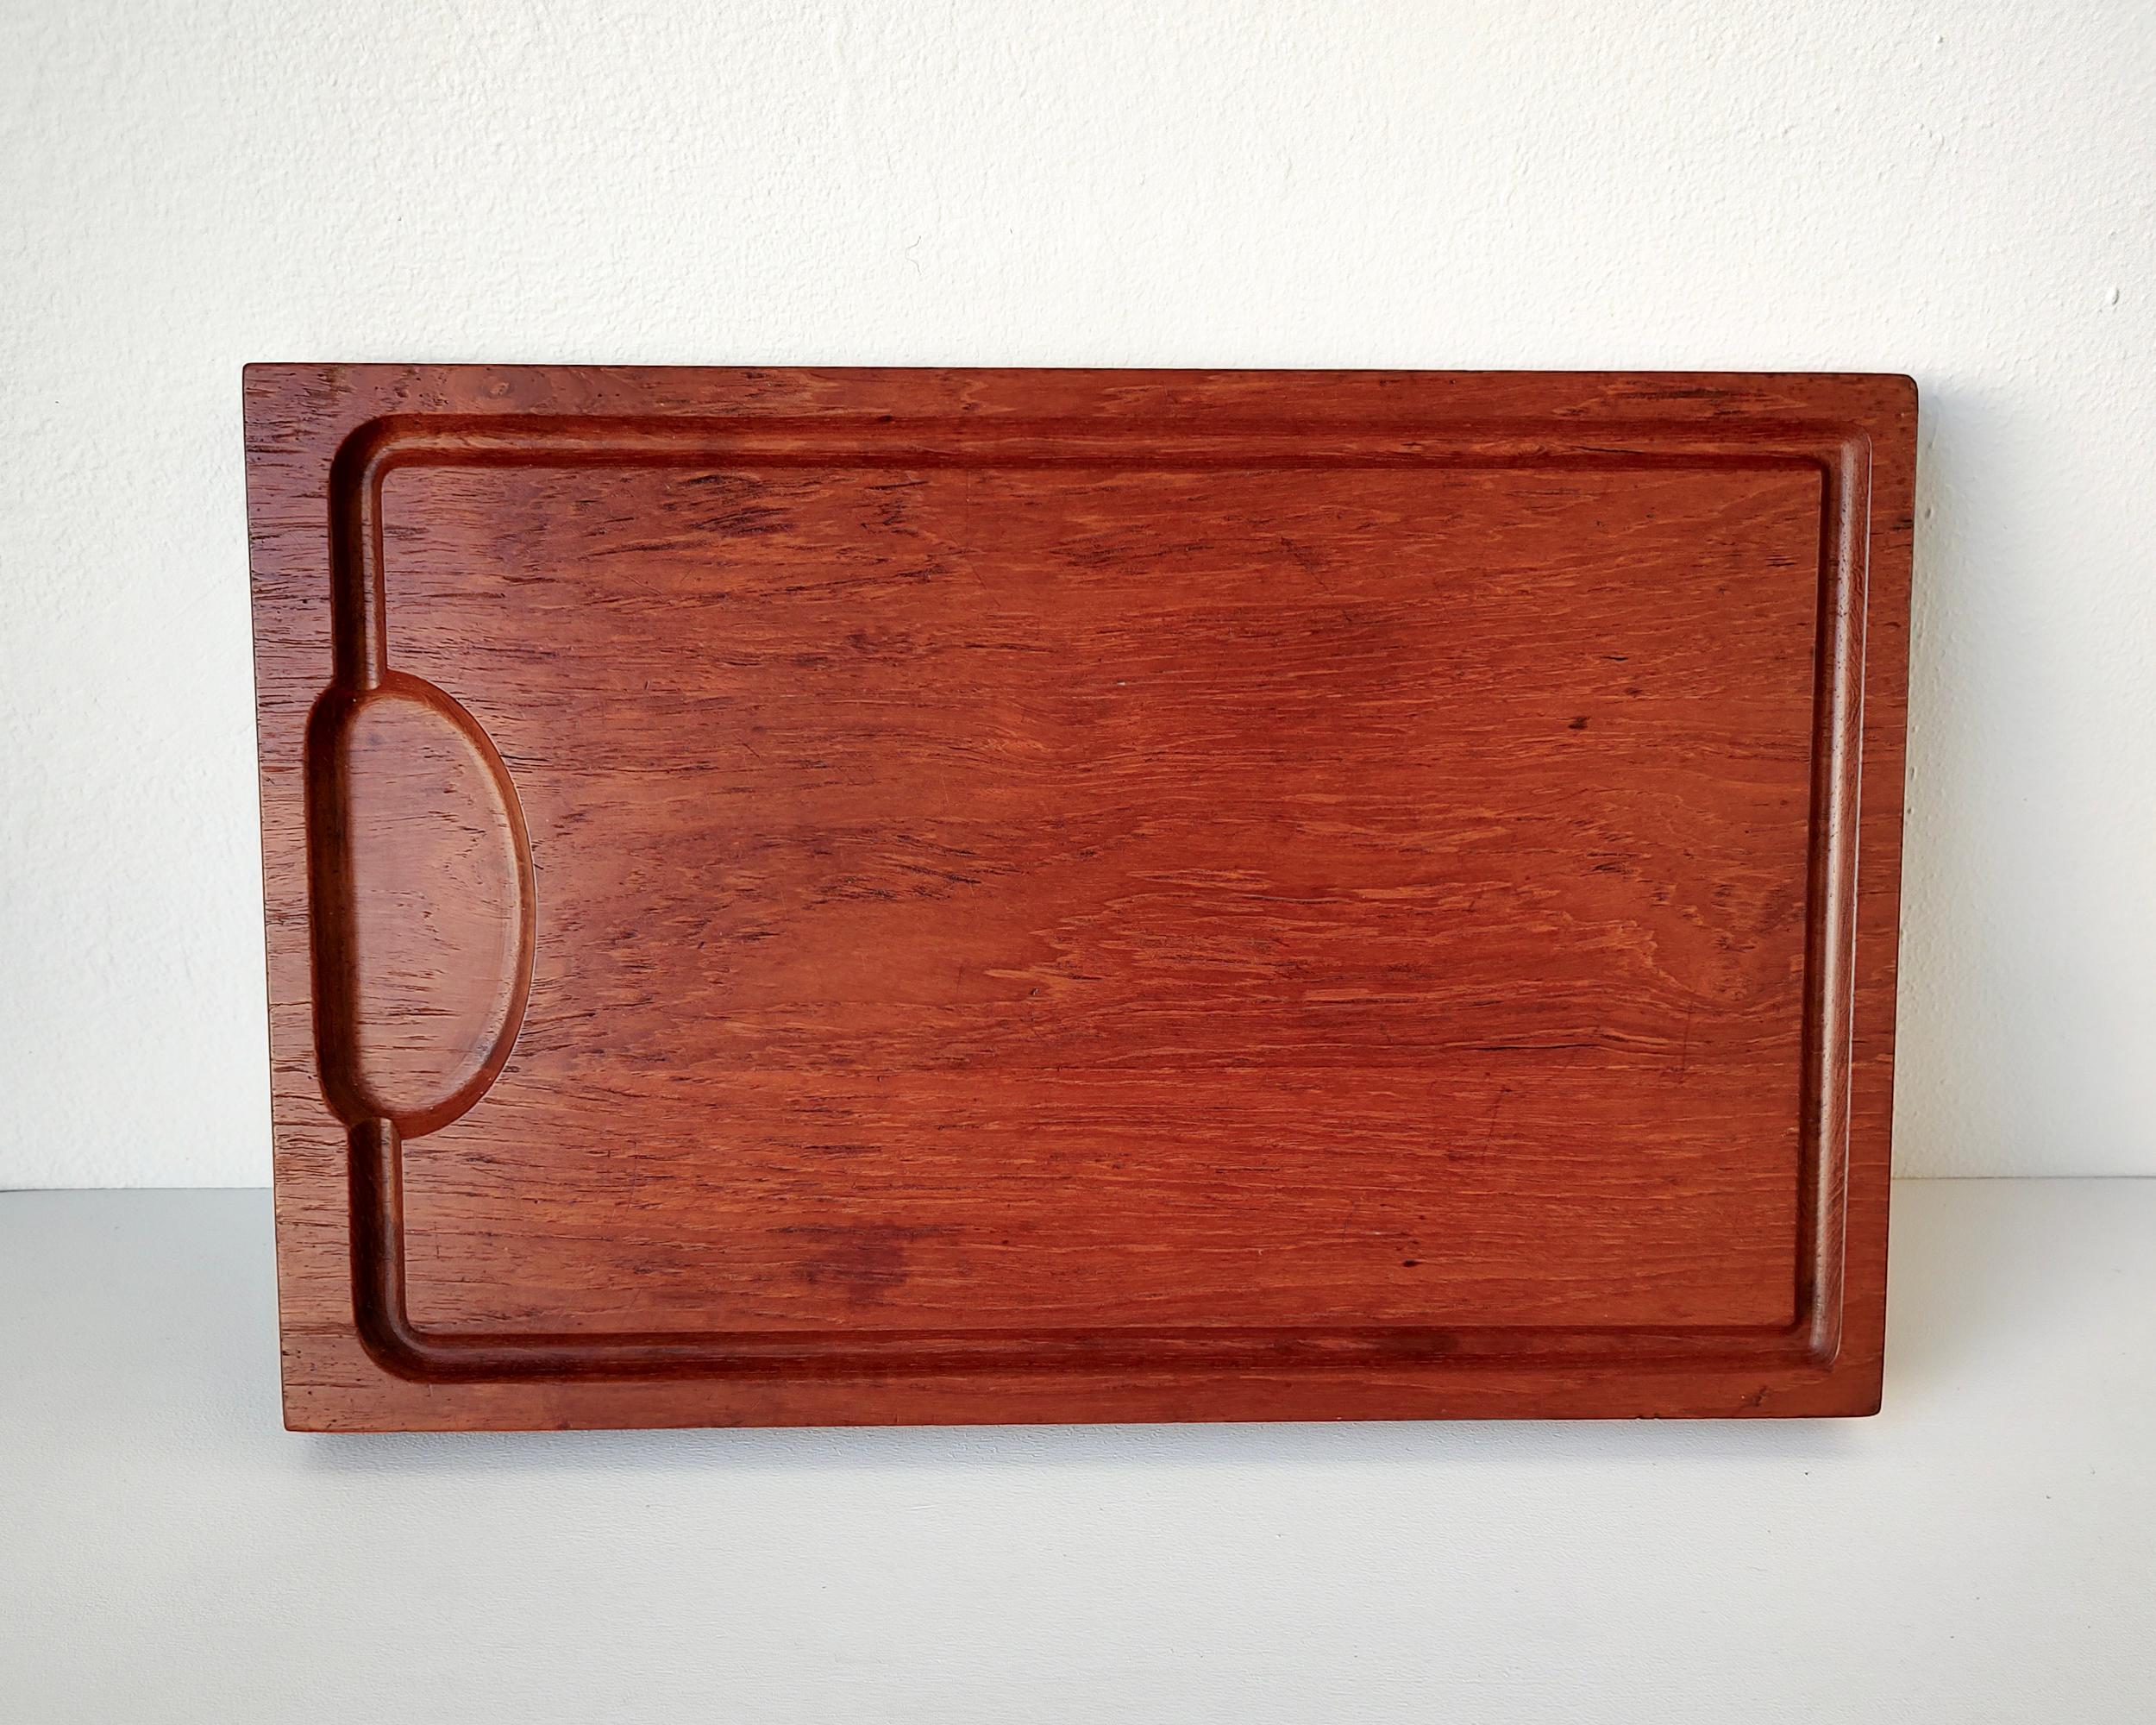 Beautiful vintage solid teak cutting board with carved channel for catching liquids. The surface has been lightly sanded and conditioned with food-safe oil.